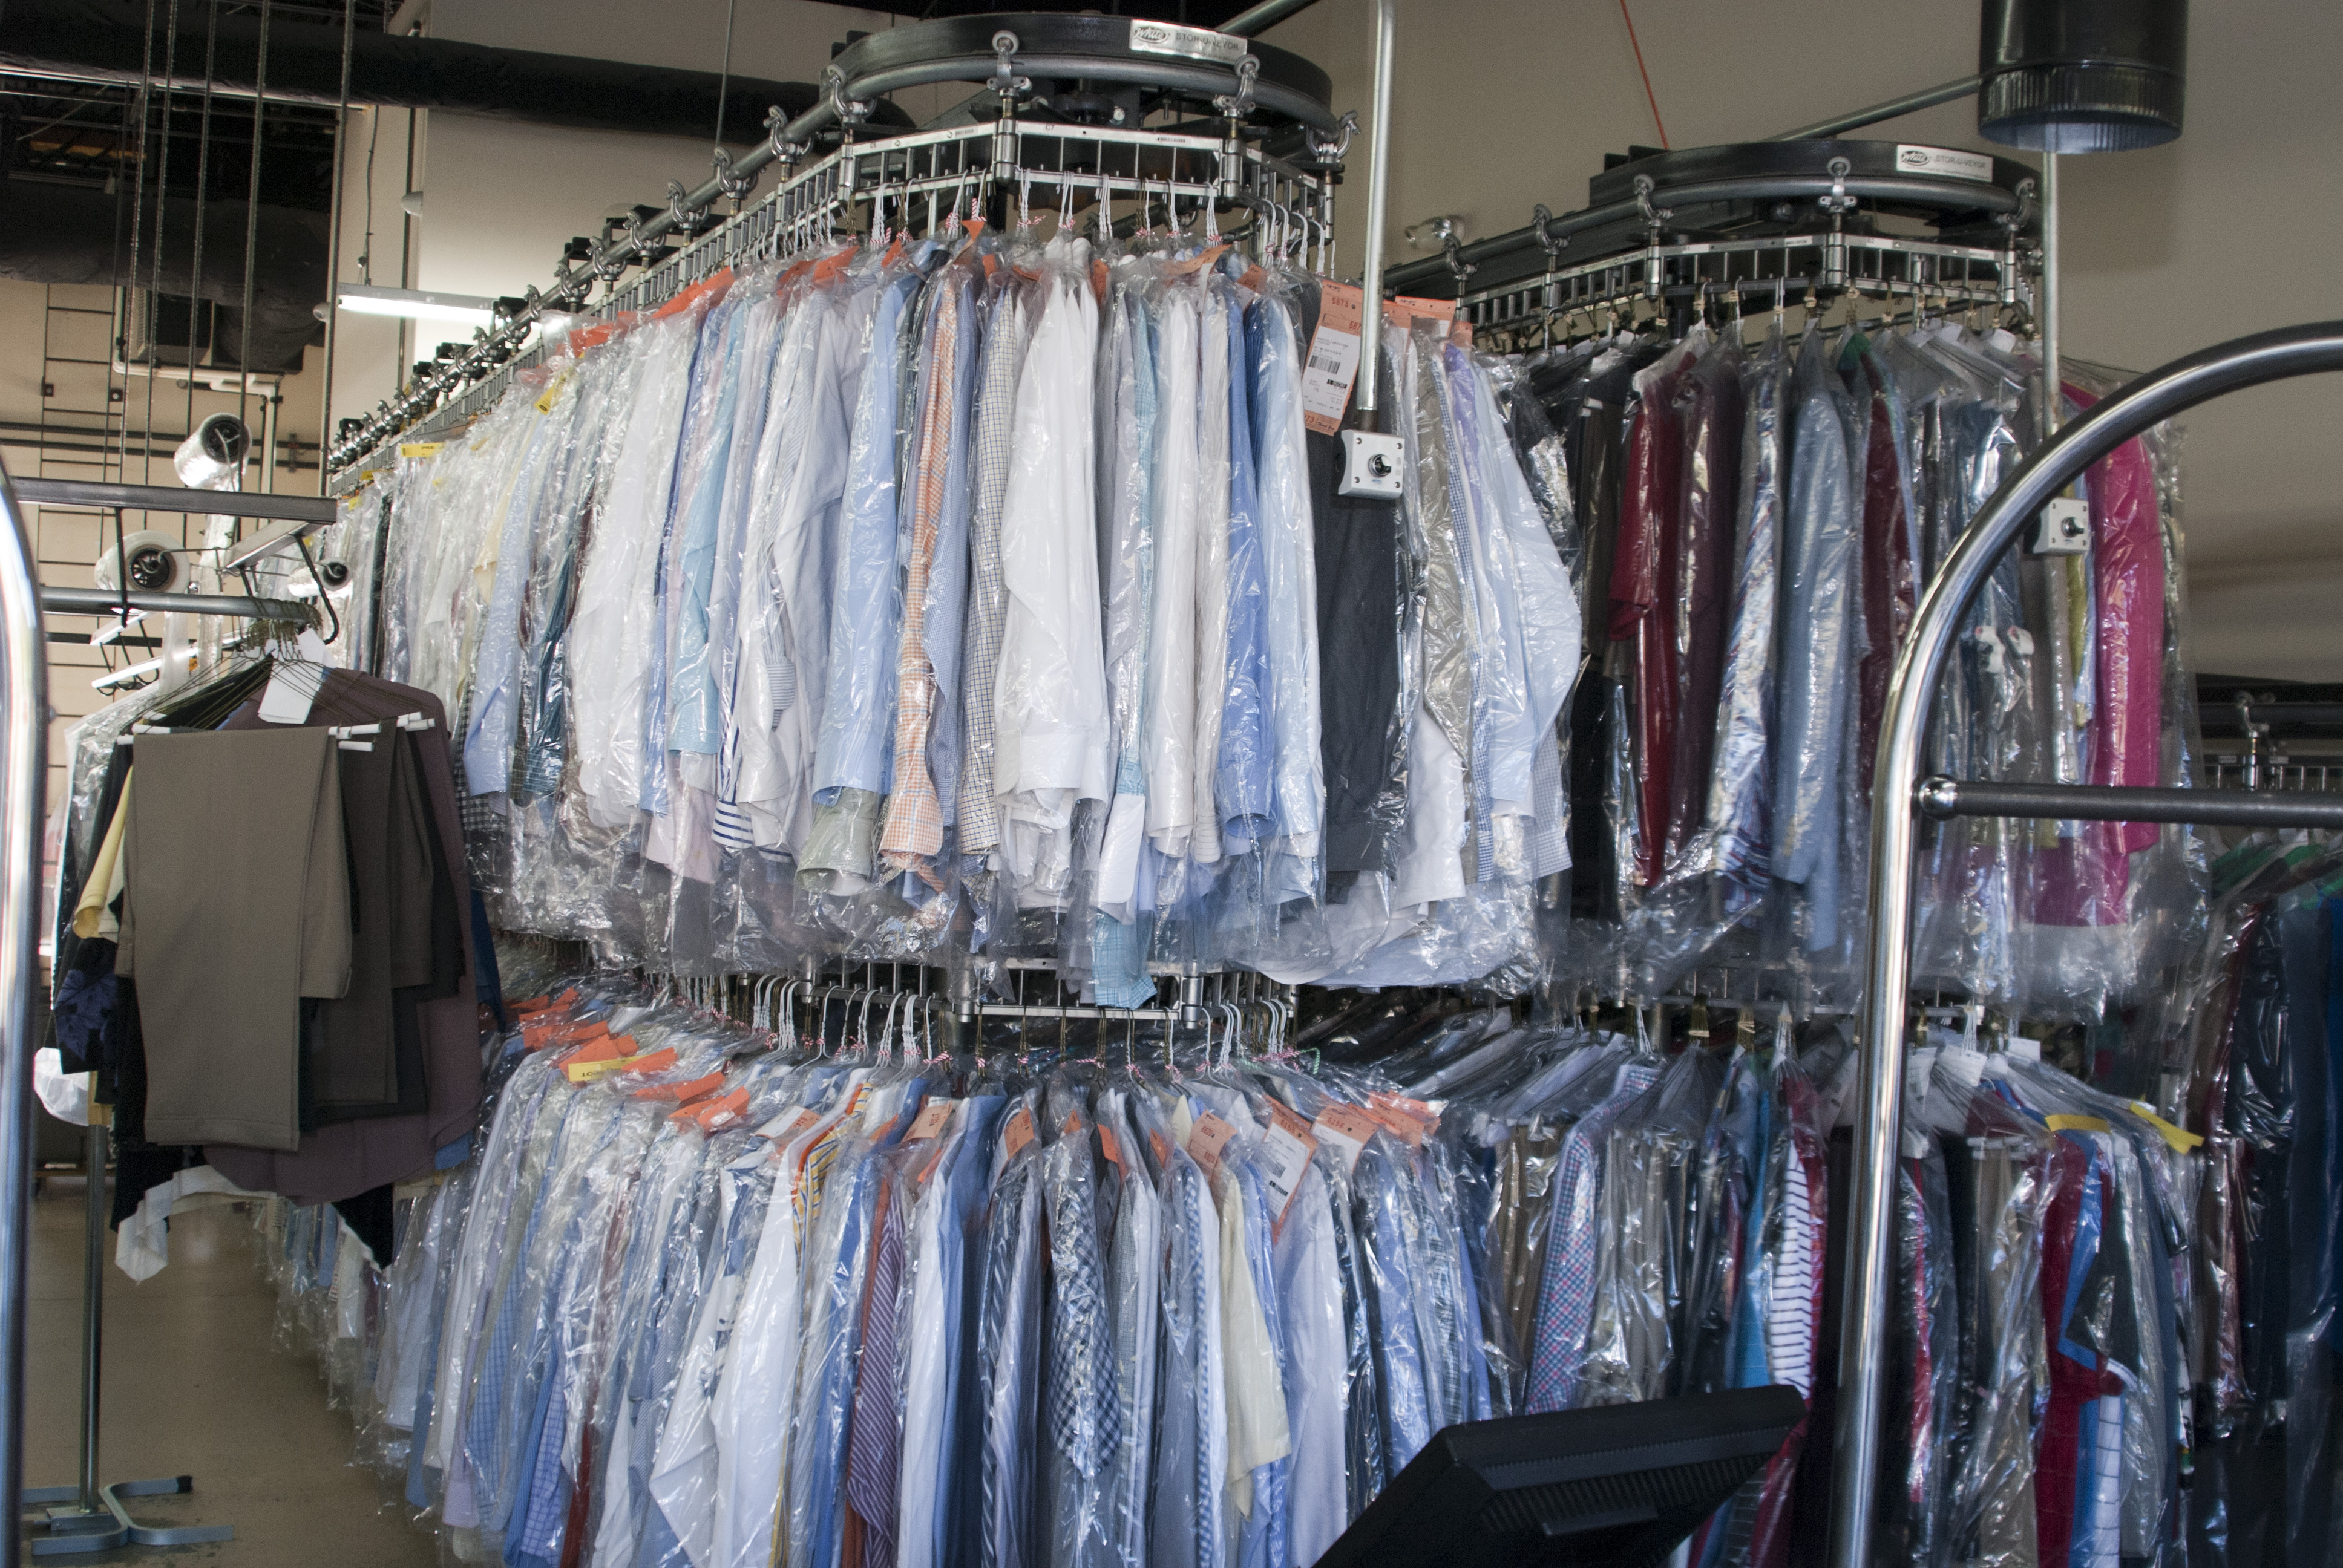 Find Dry Cleaners To Clean All Sorts Of Clothing In Bandra!